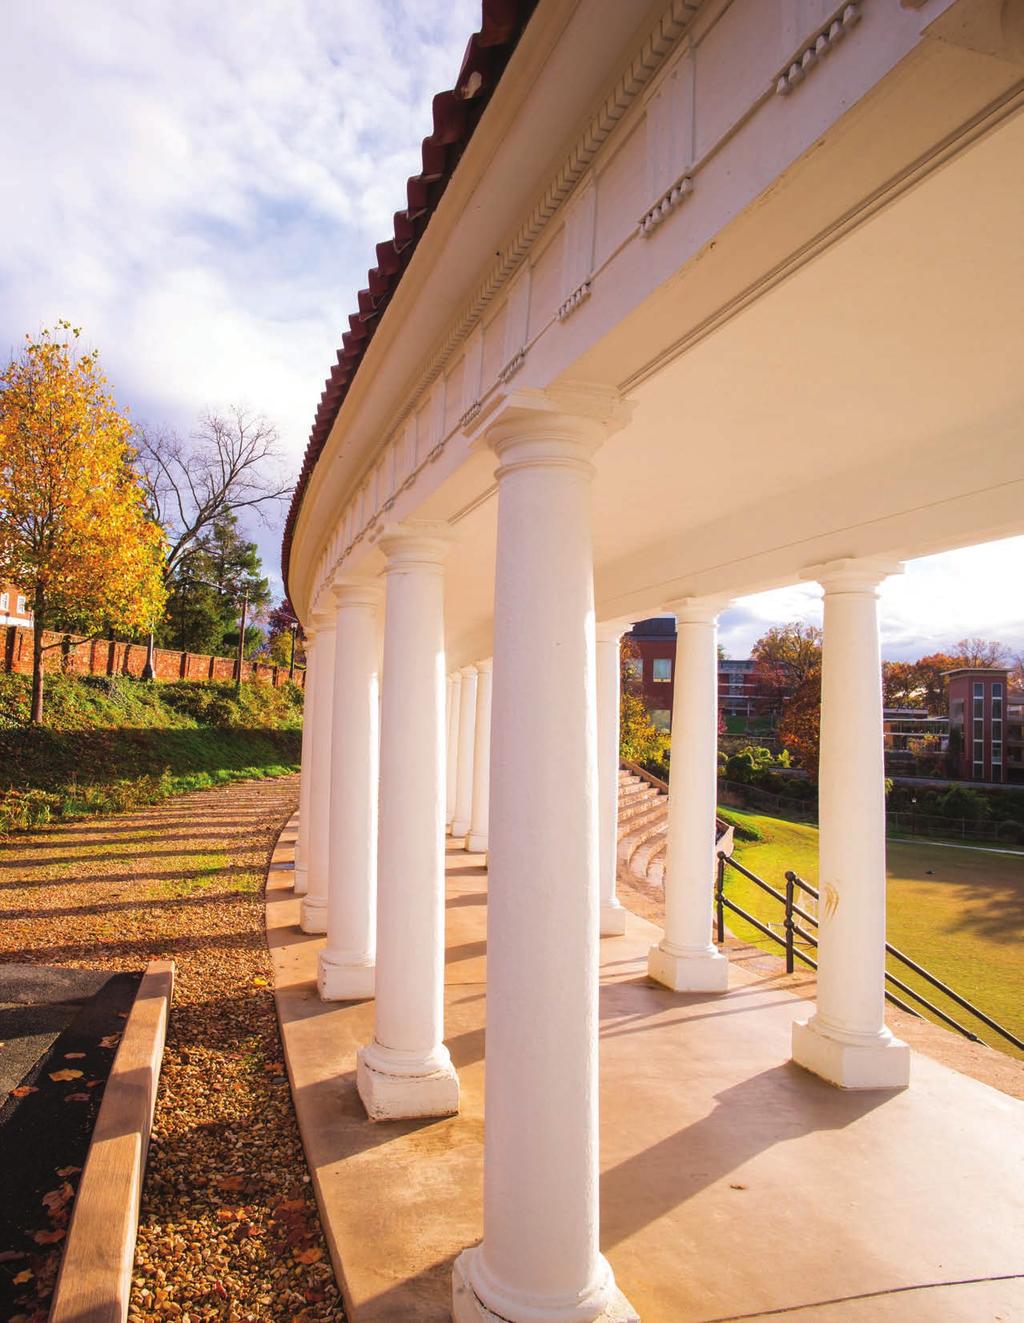 Helping you invest in your financial future is important to the University of Virginia (UVA).